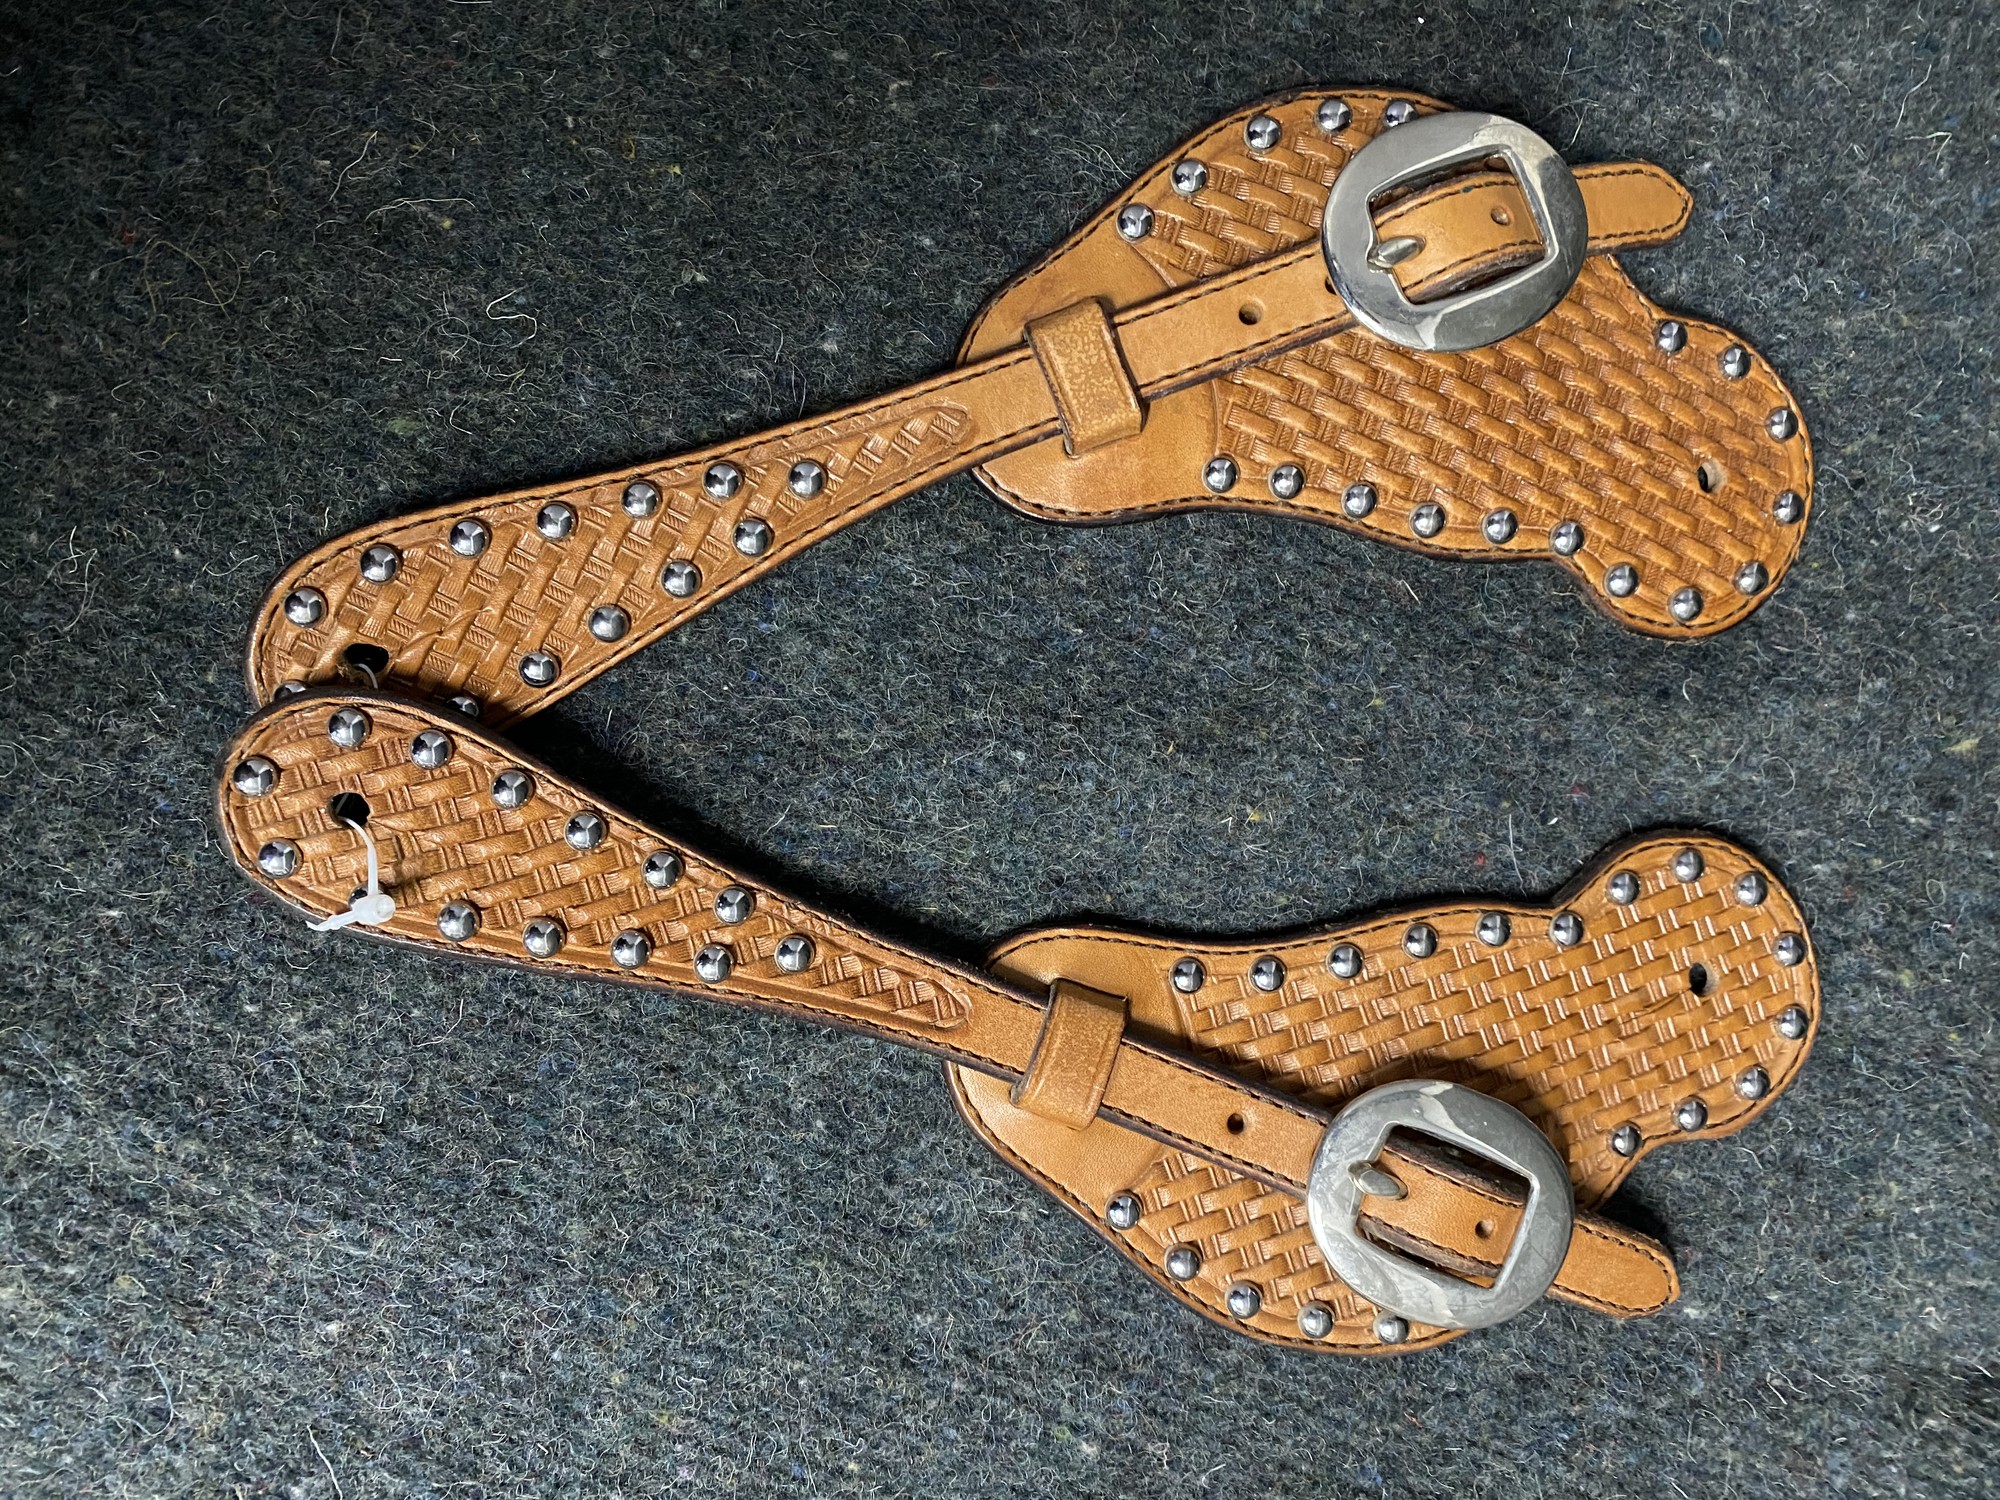 Buckaroo Spur Straps with Basket Weave &  Buttons
$70